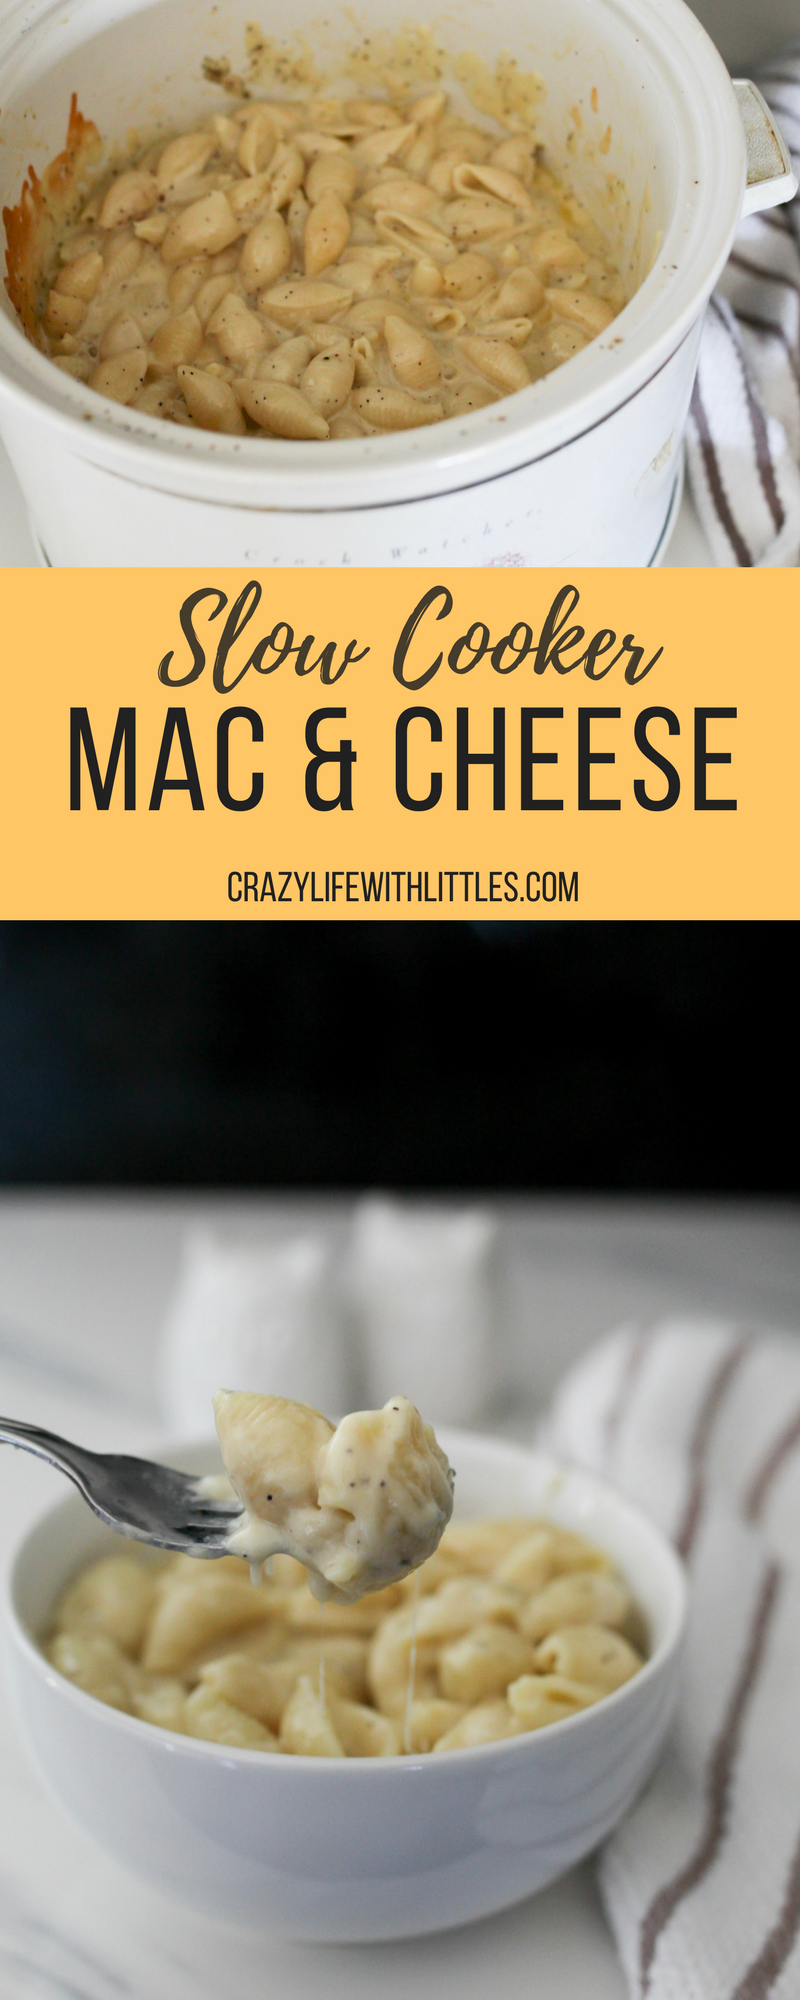 crockpot mac and cheese with cream cheese creamy crockpot mac and cheese recipe no boil slow cooker mac and cheese slow cooker mac and cheese with bacon slow cooker mac and cheese tasty slow cooker macaroni and cheese uncooked pasta slow cooker mac and cheese healthy